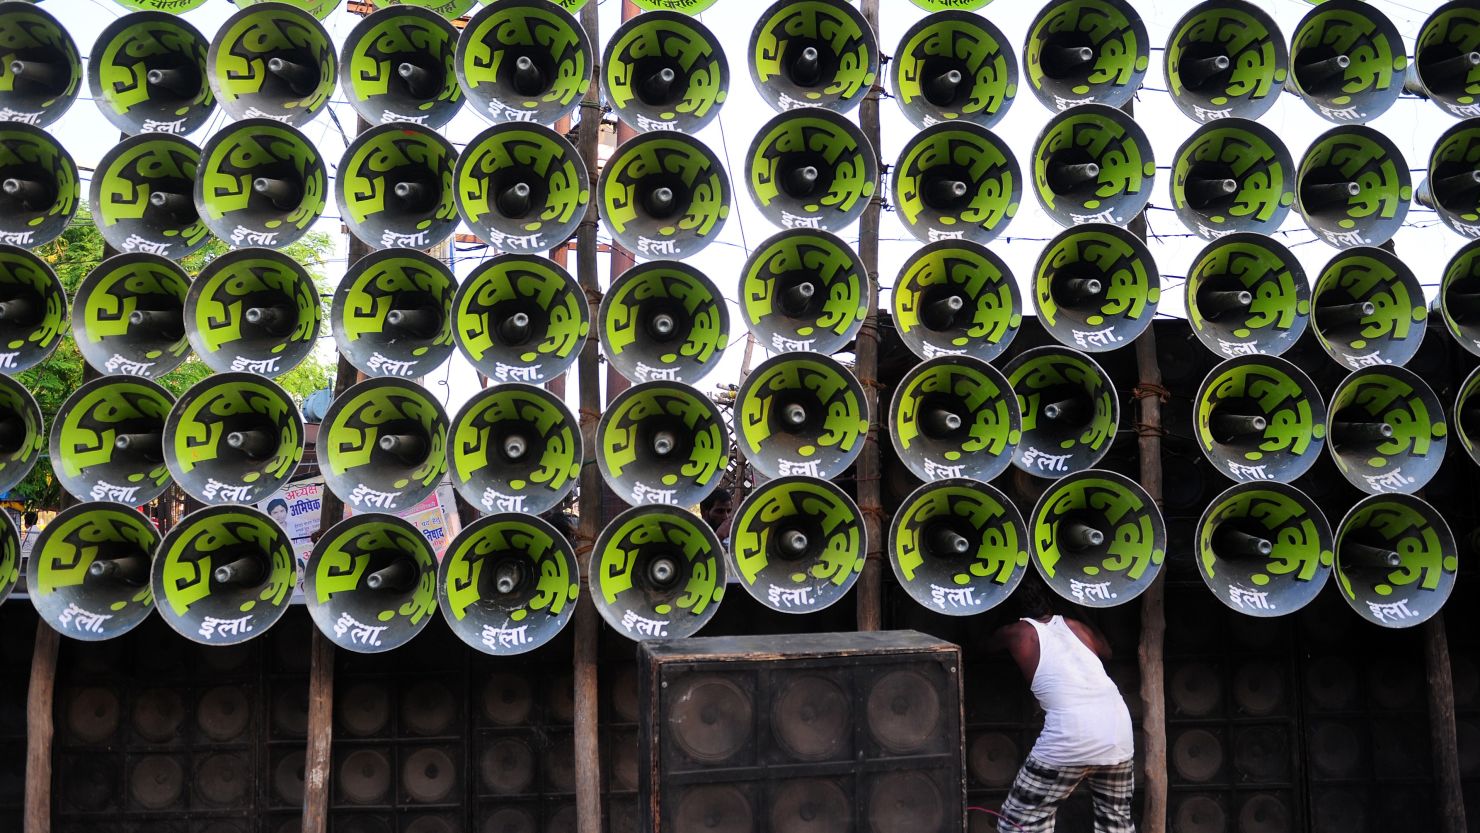 An Indian electrician arranges loudspeakers during a music festival in the city of Prayagraj. 